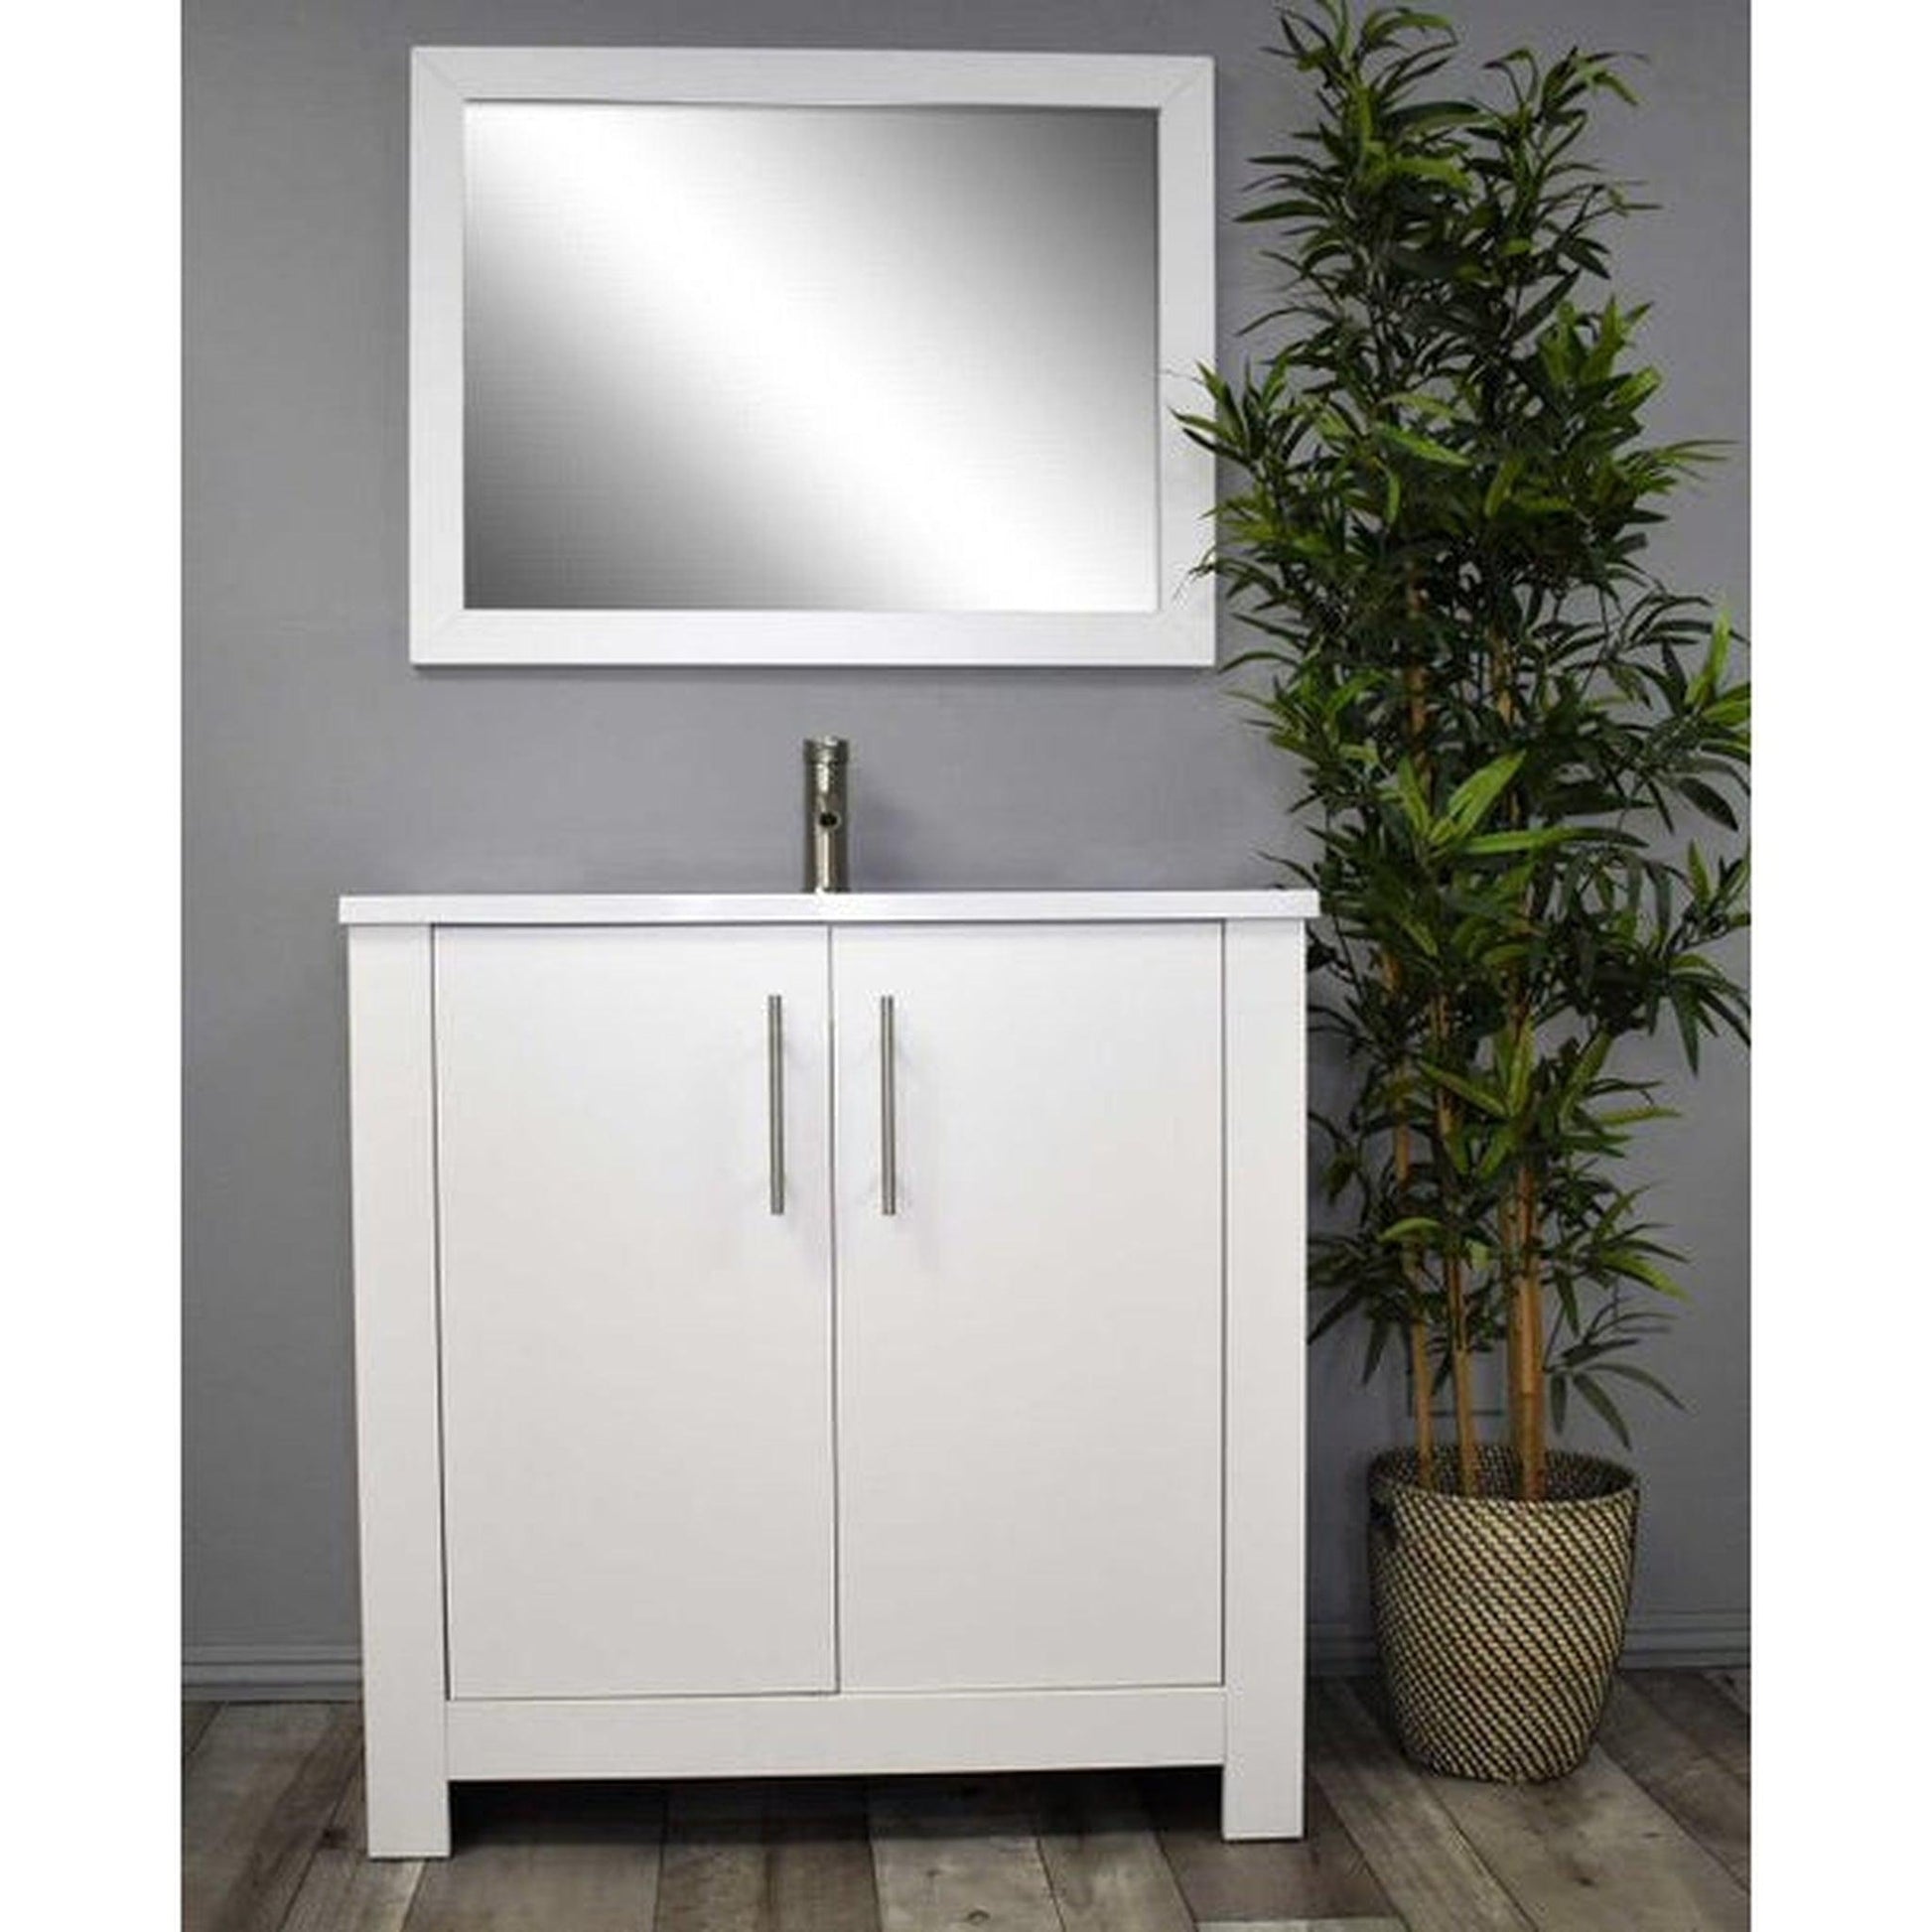 Volpa USA Austin 36" x 20" Glossy White Modern Freestanding Bathroom Vanity With Acrylic Top, Integrated Acrylic Sink And Brushed Nickel Handles